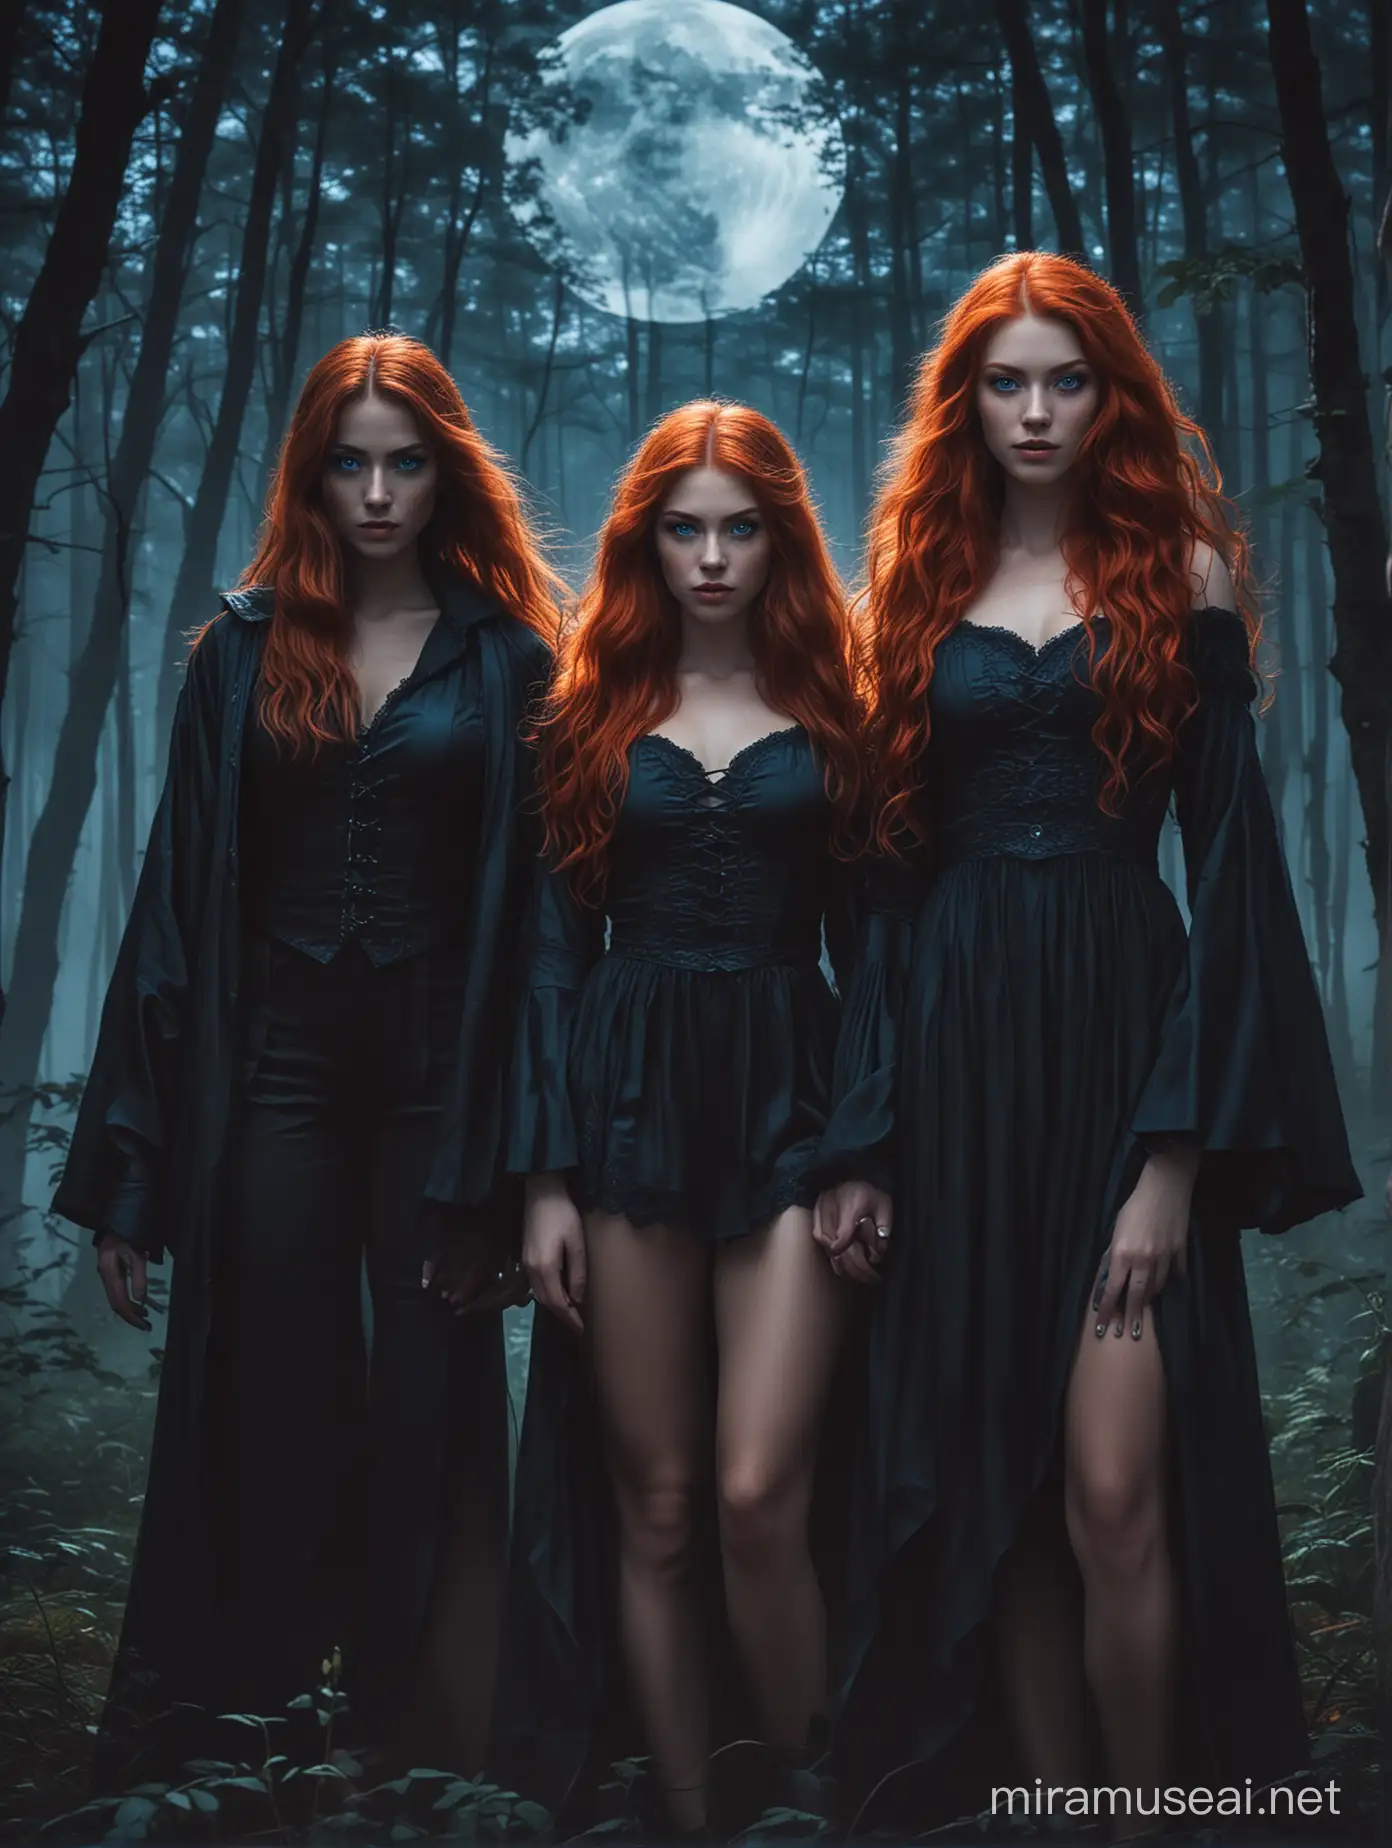 Two beautiful red hair ladies, with one lady having red and the other lady having blue eyes, and a mighty black werewolf with blue eyes standing behind them in a dark night forest with a red glowing moon behind them